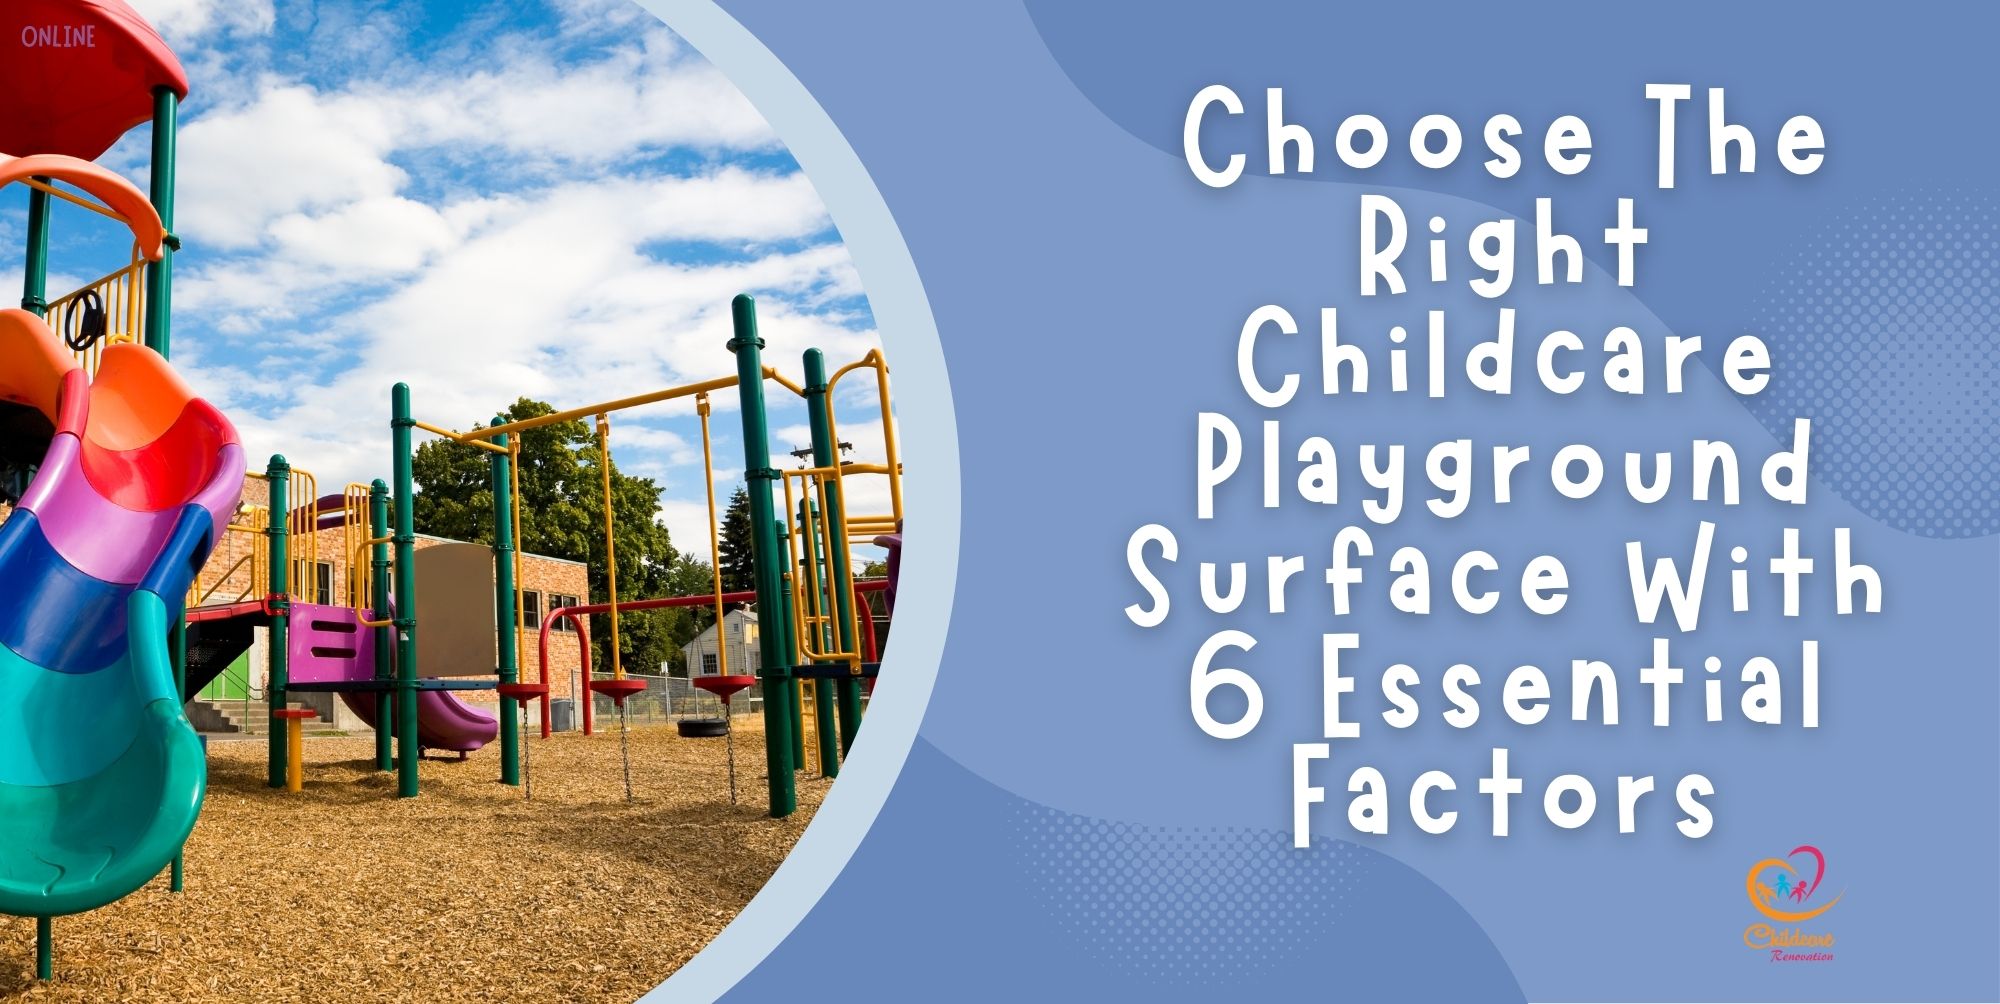 Choose The Right Childcare Playground Surface With 6 Essential Factors